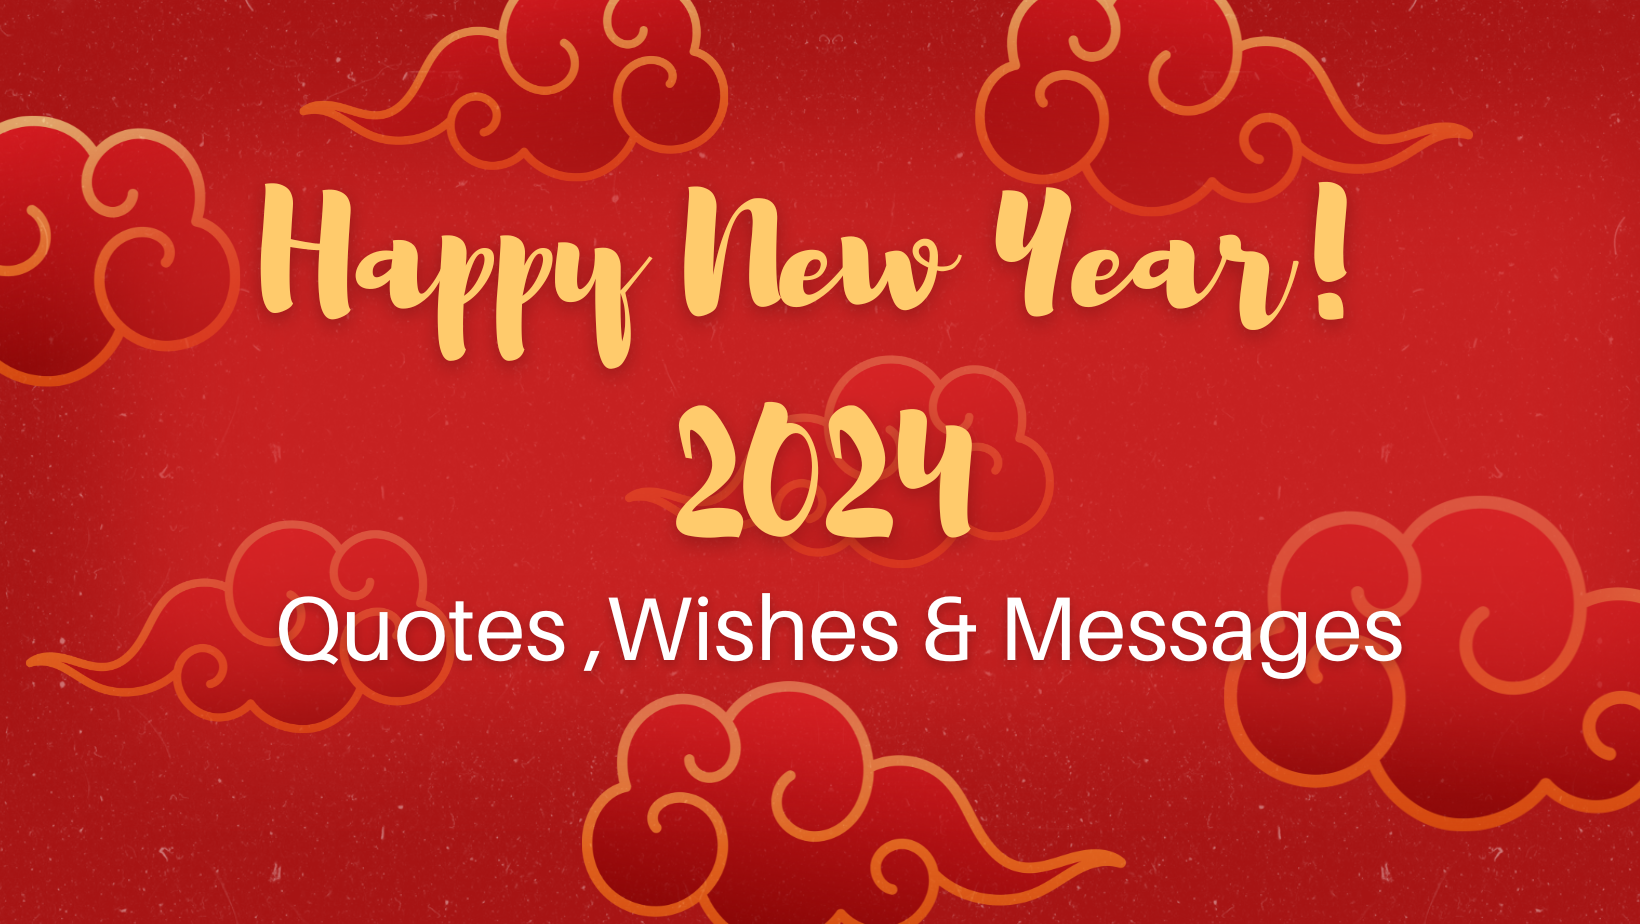 15 Heartwarming Happy New Year 2024 Quotes, Wishes, and Messages to Share